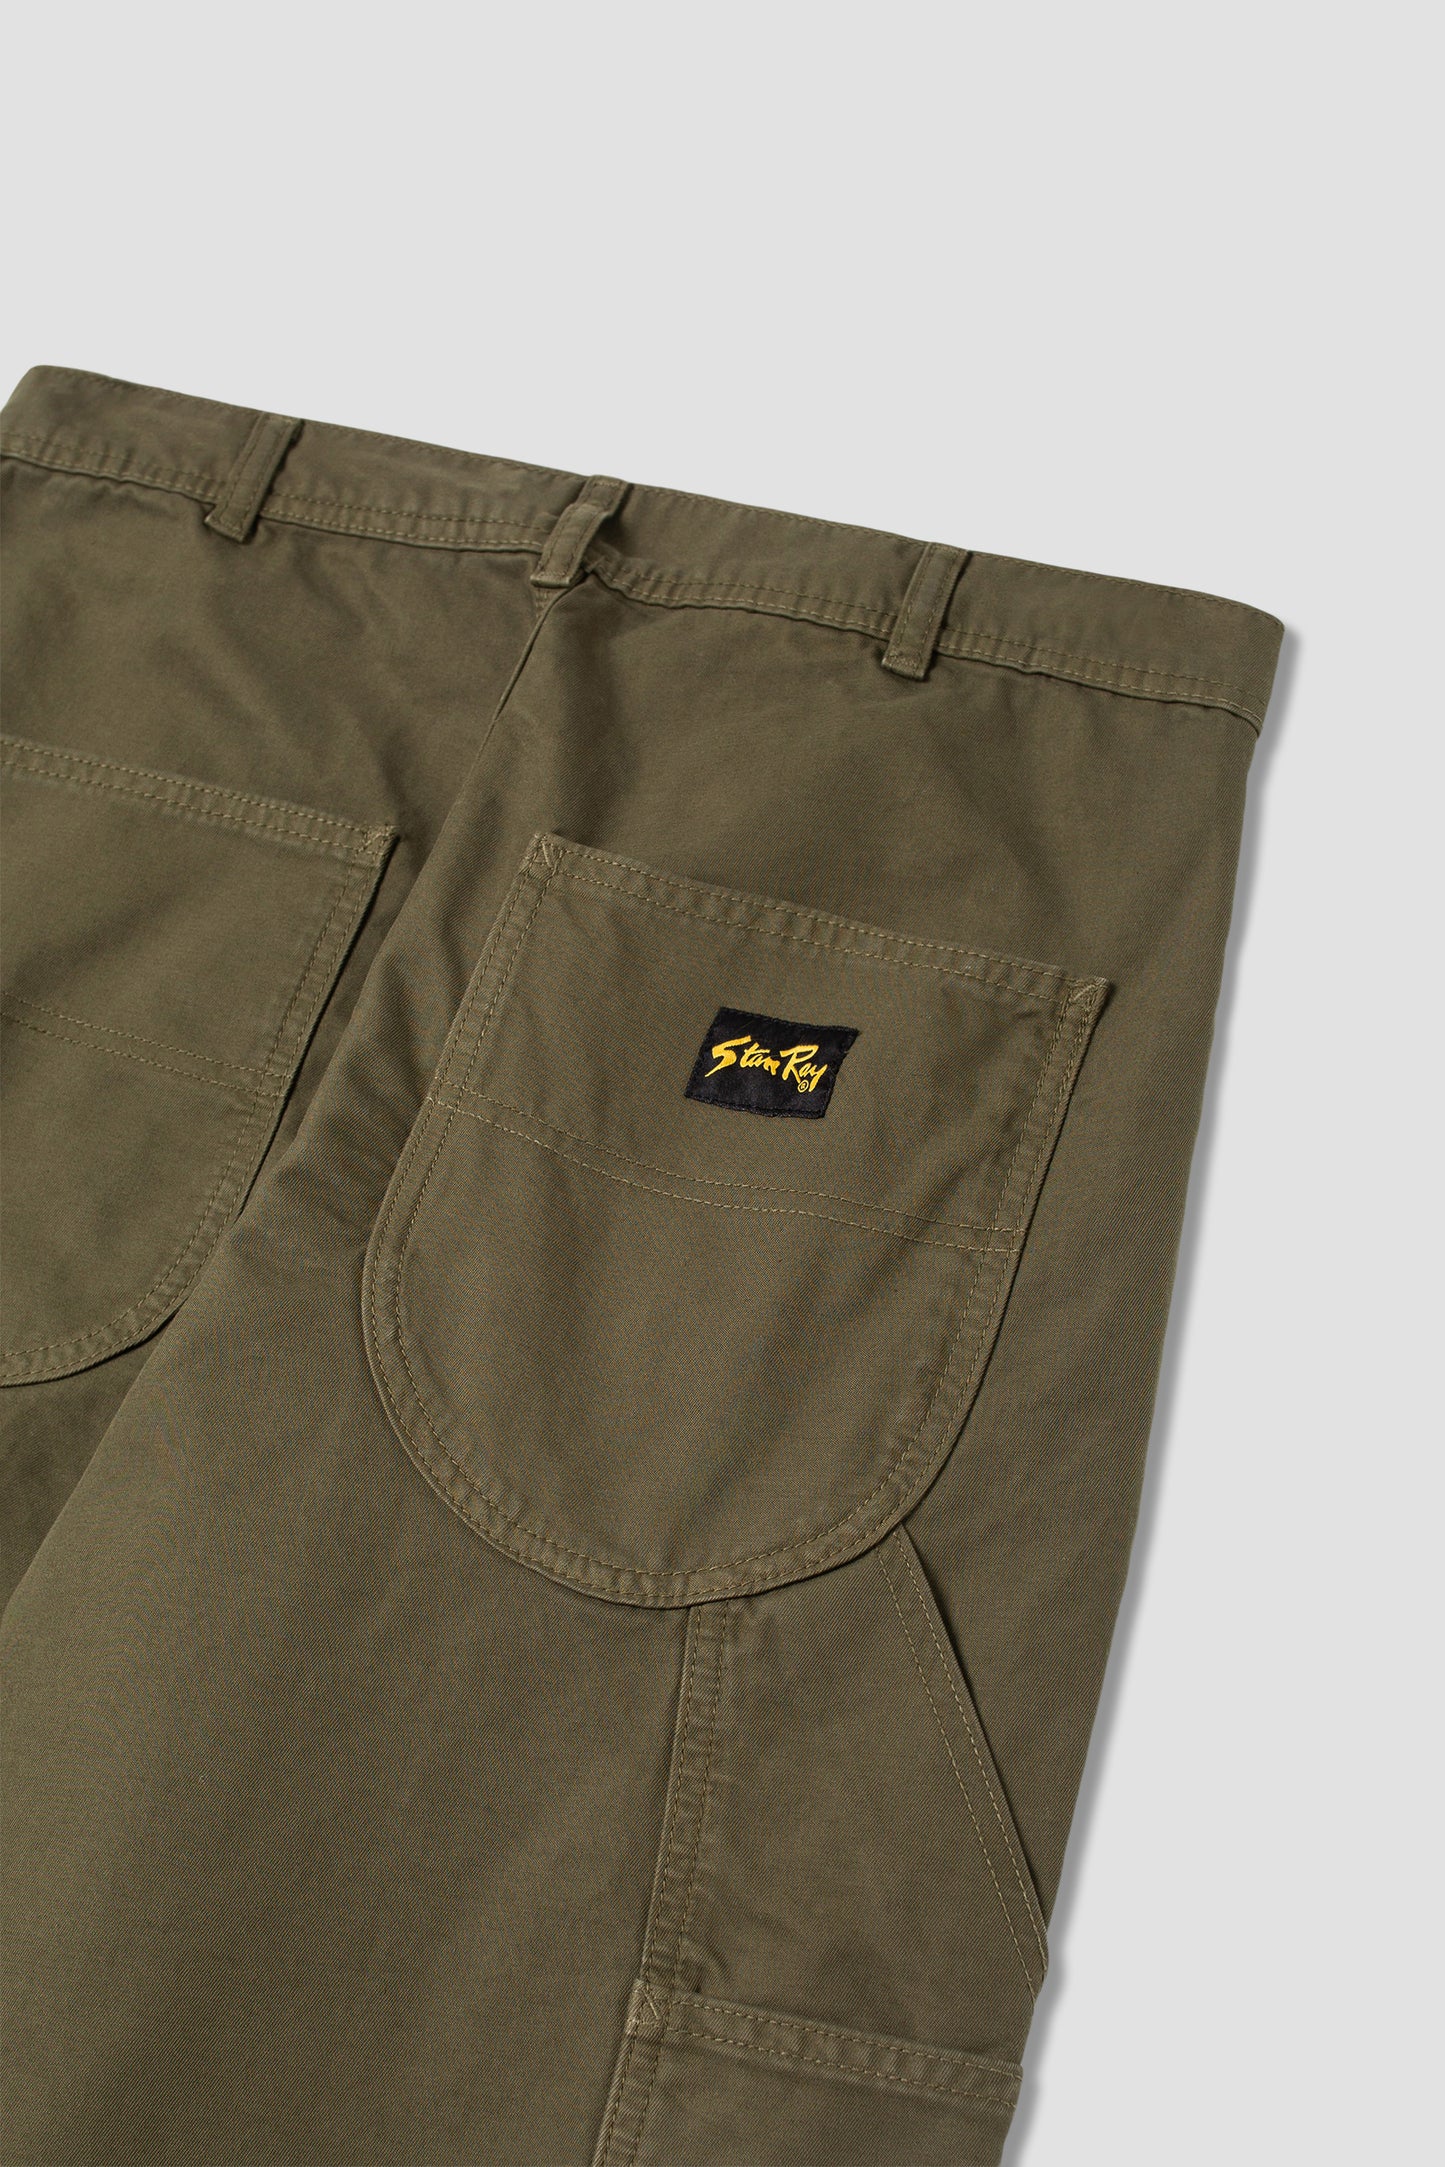 80s Painter Pant (Olive Twill)